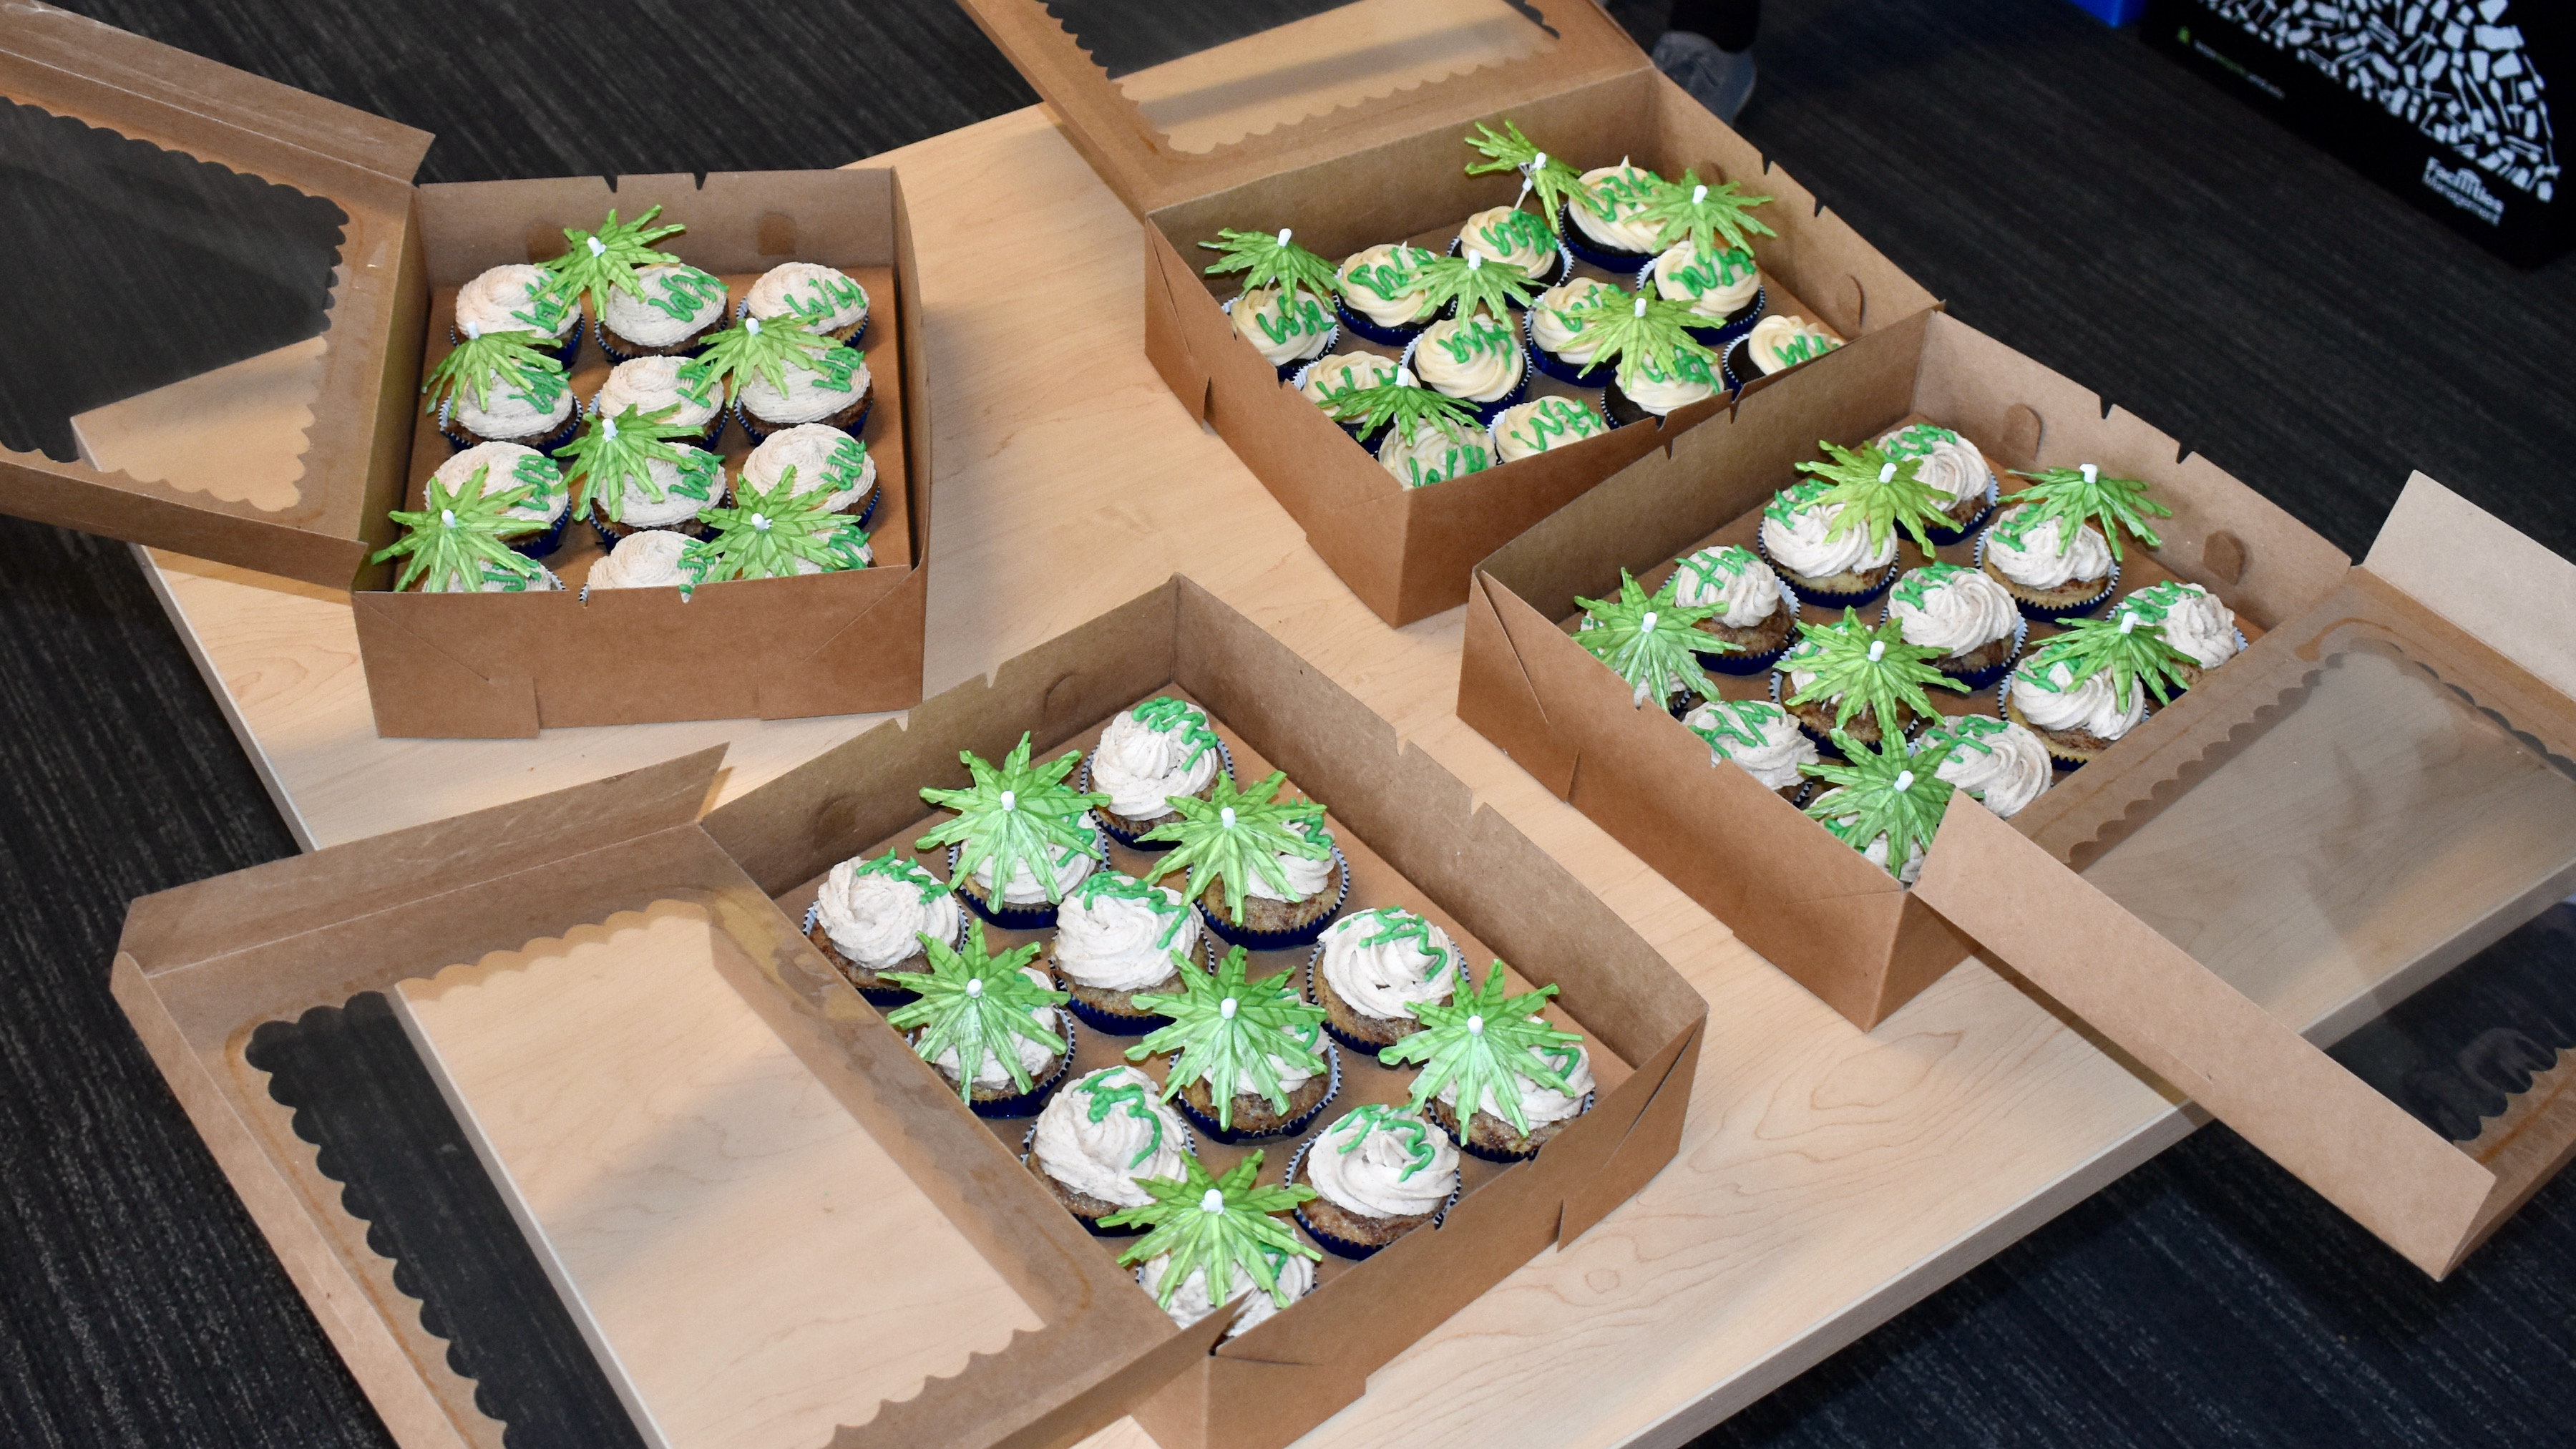 Four boxes of cupcakes with green frosting and palm tree cocktail umbrellas.